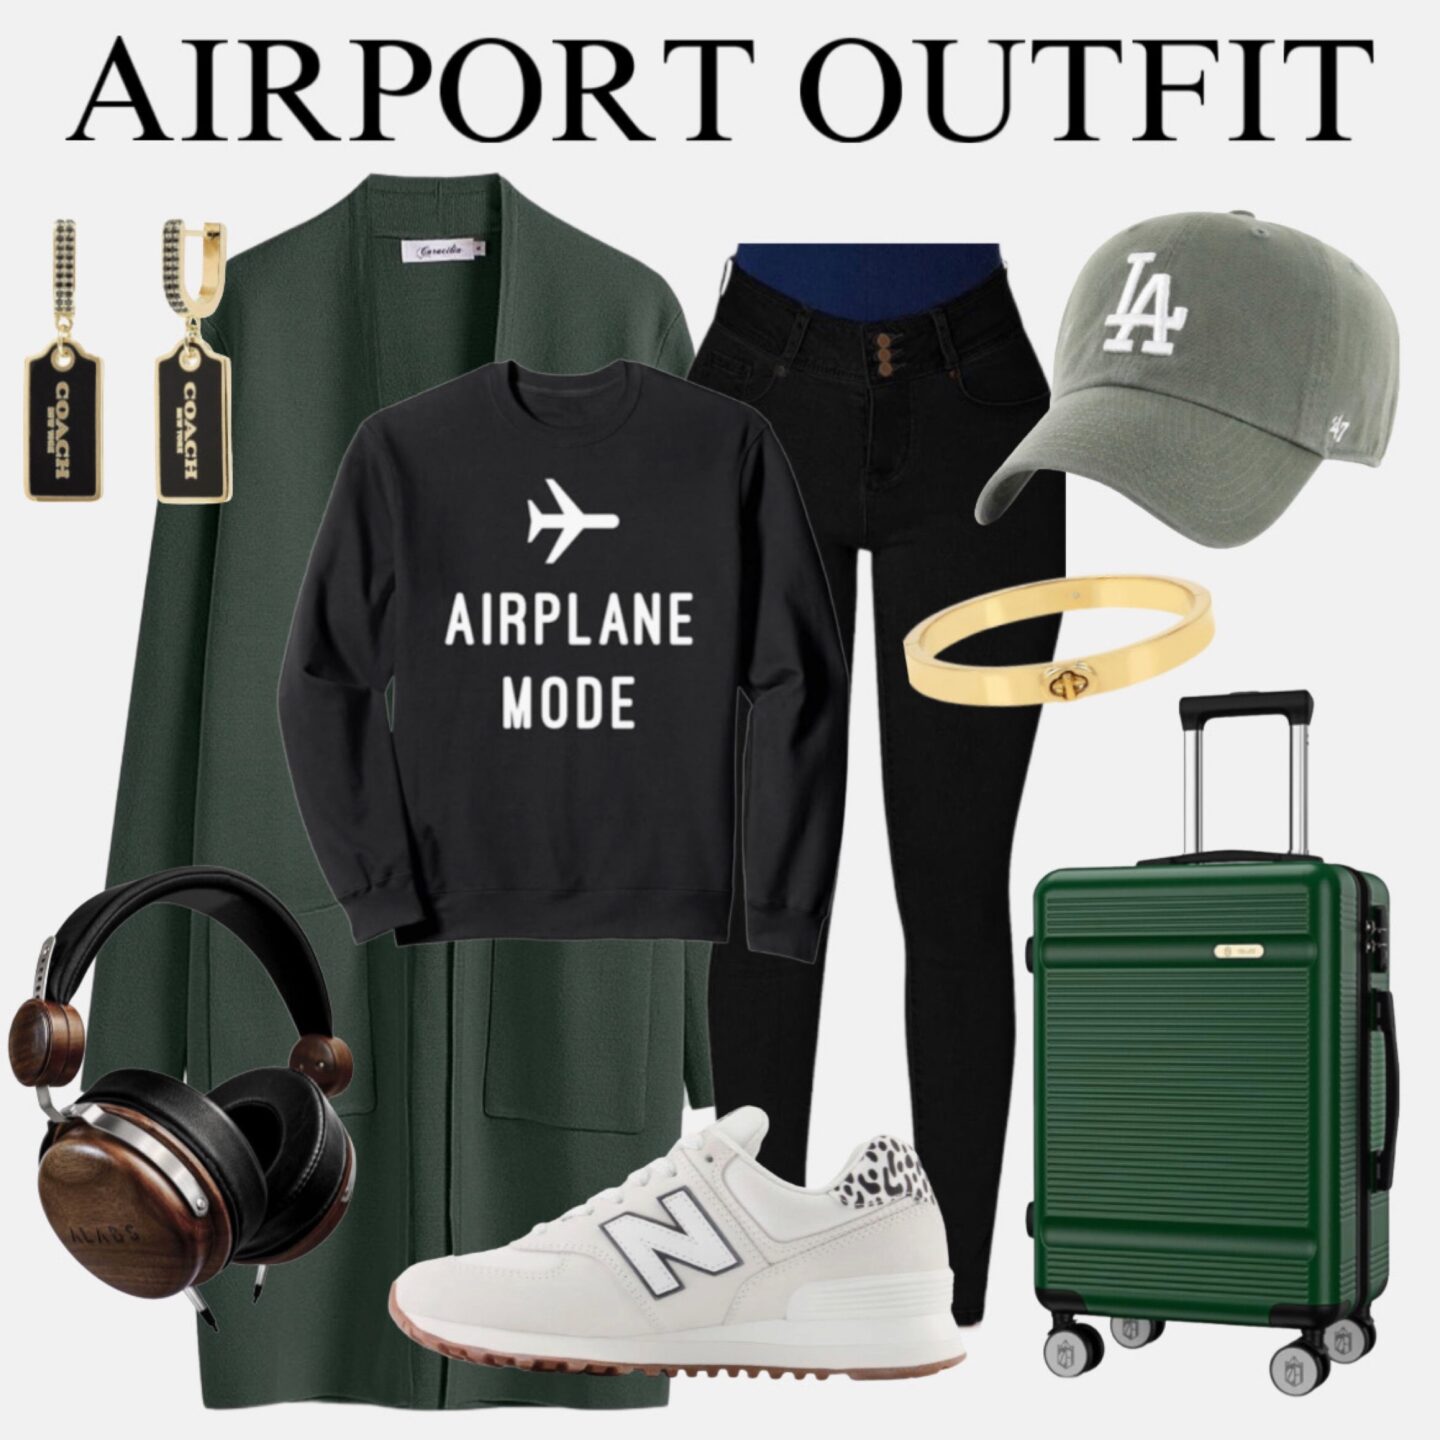 AIRPORT OUTFIT IDEAS – HOW TO DRESS TO THE AIRPORT – The Allure Edition